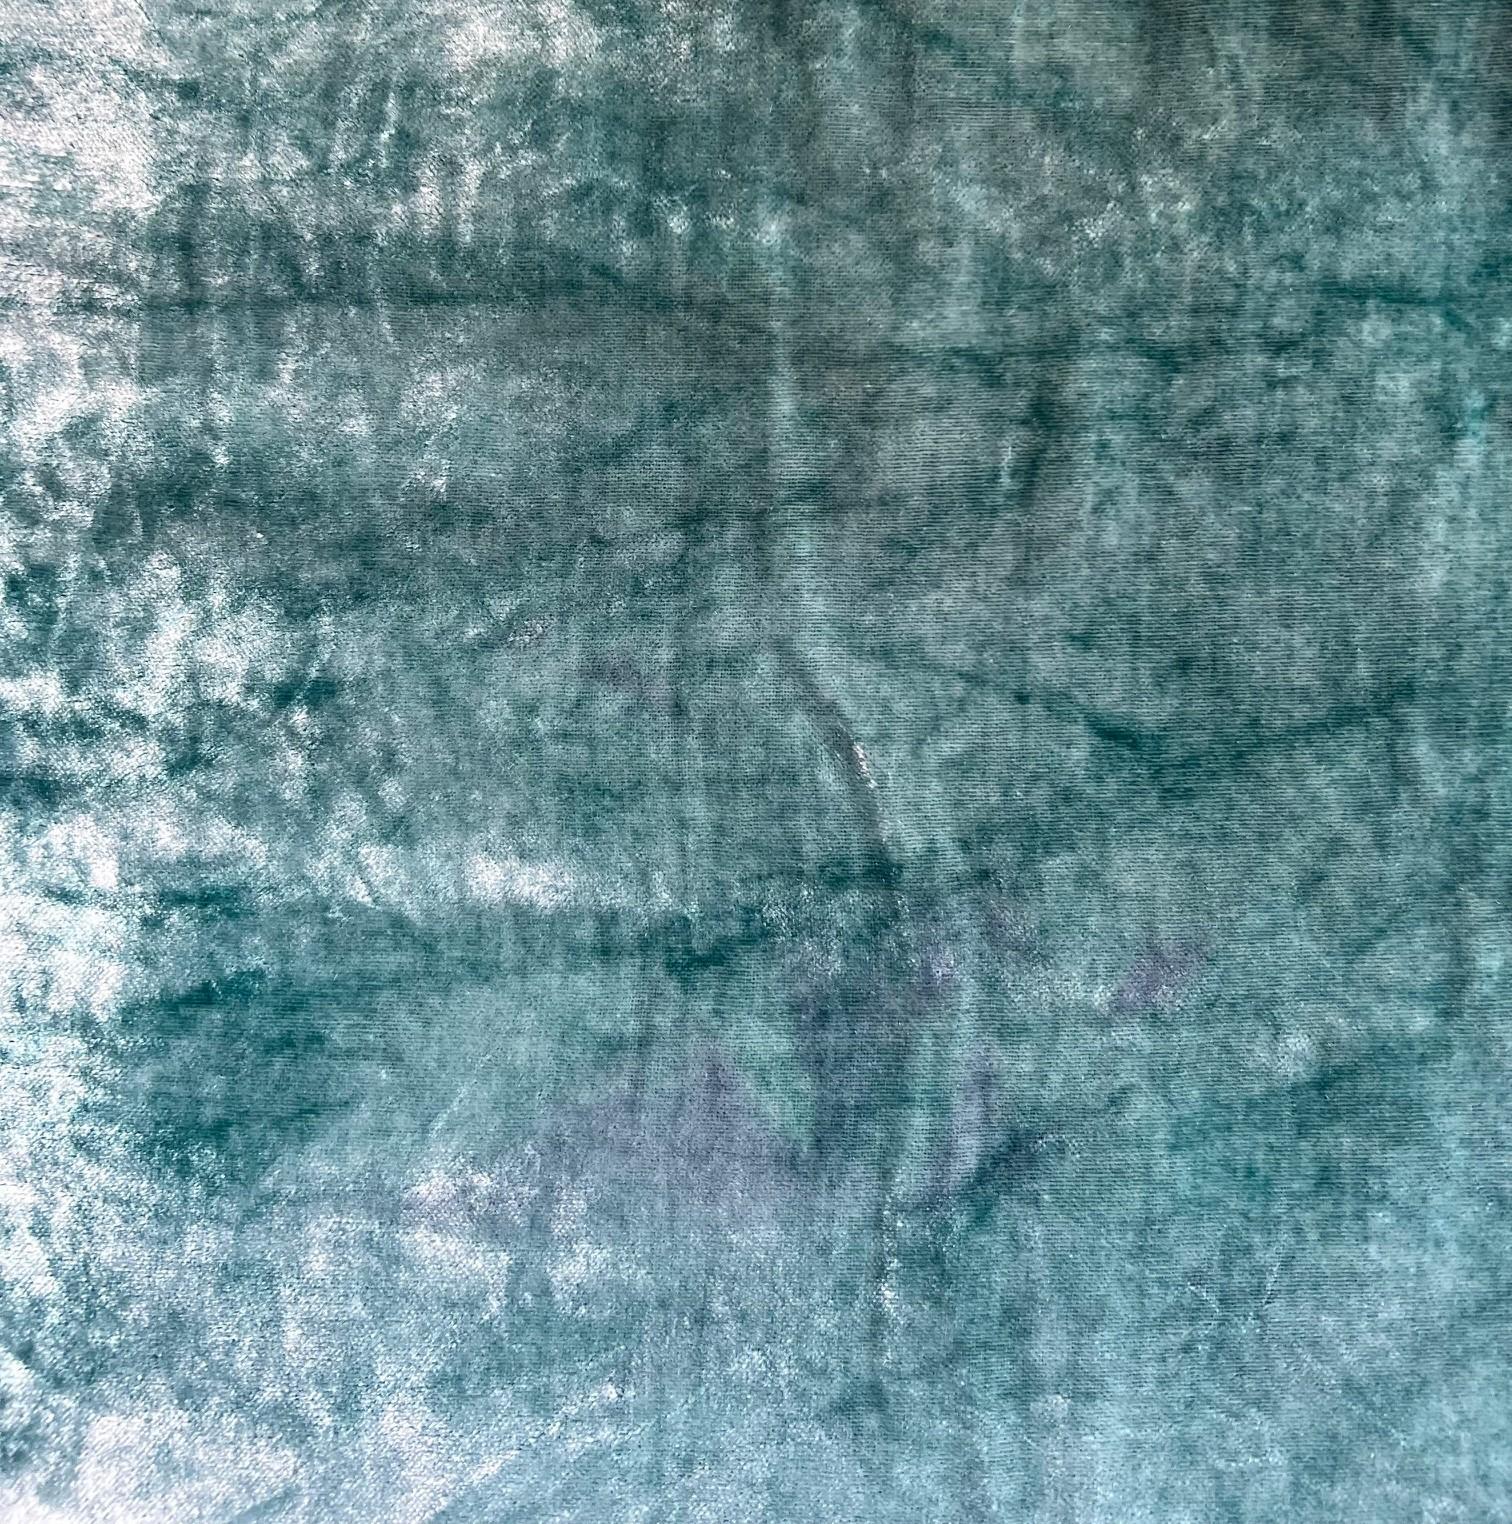 Soft and Tactile Hand Dyed Fortuny Silk Velvet in Teal - 2.25 yards For Sale 1